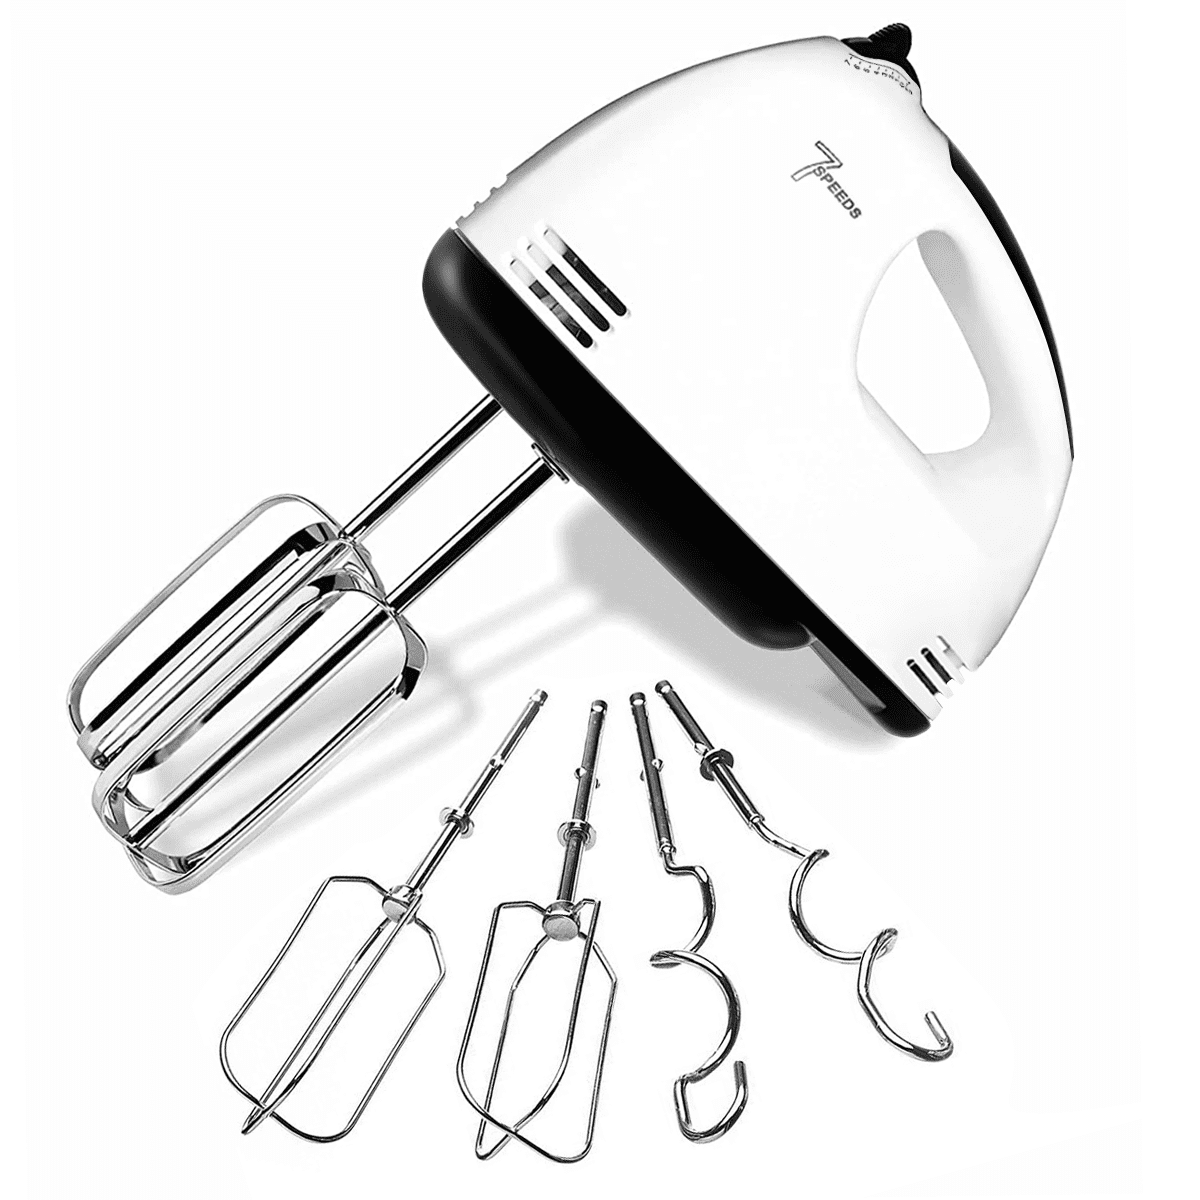 7-gear Household Electric Egg Beater Hand-held Automatic Dough